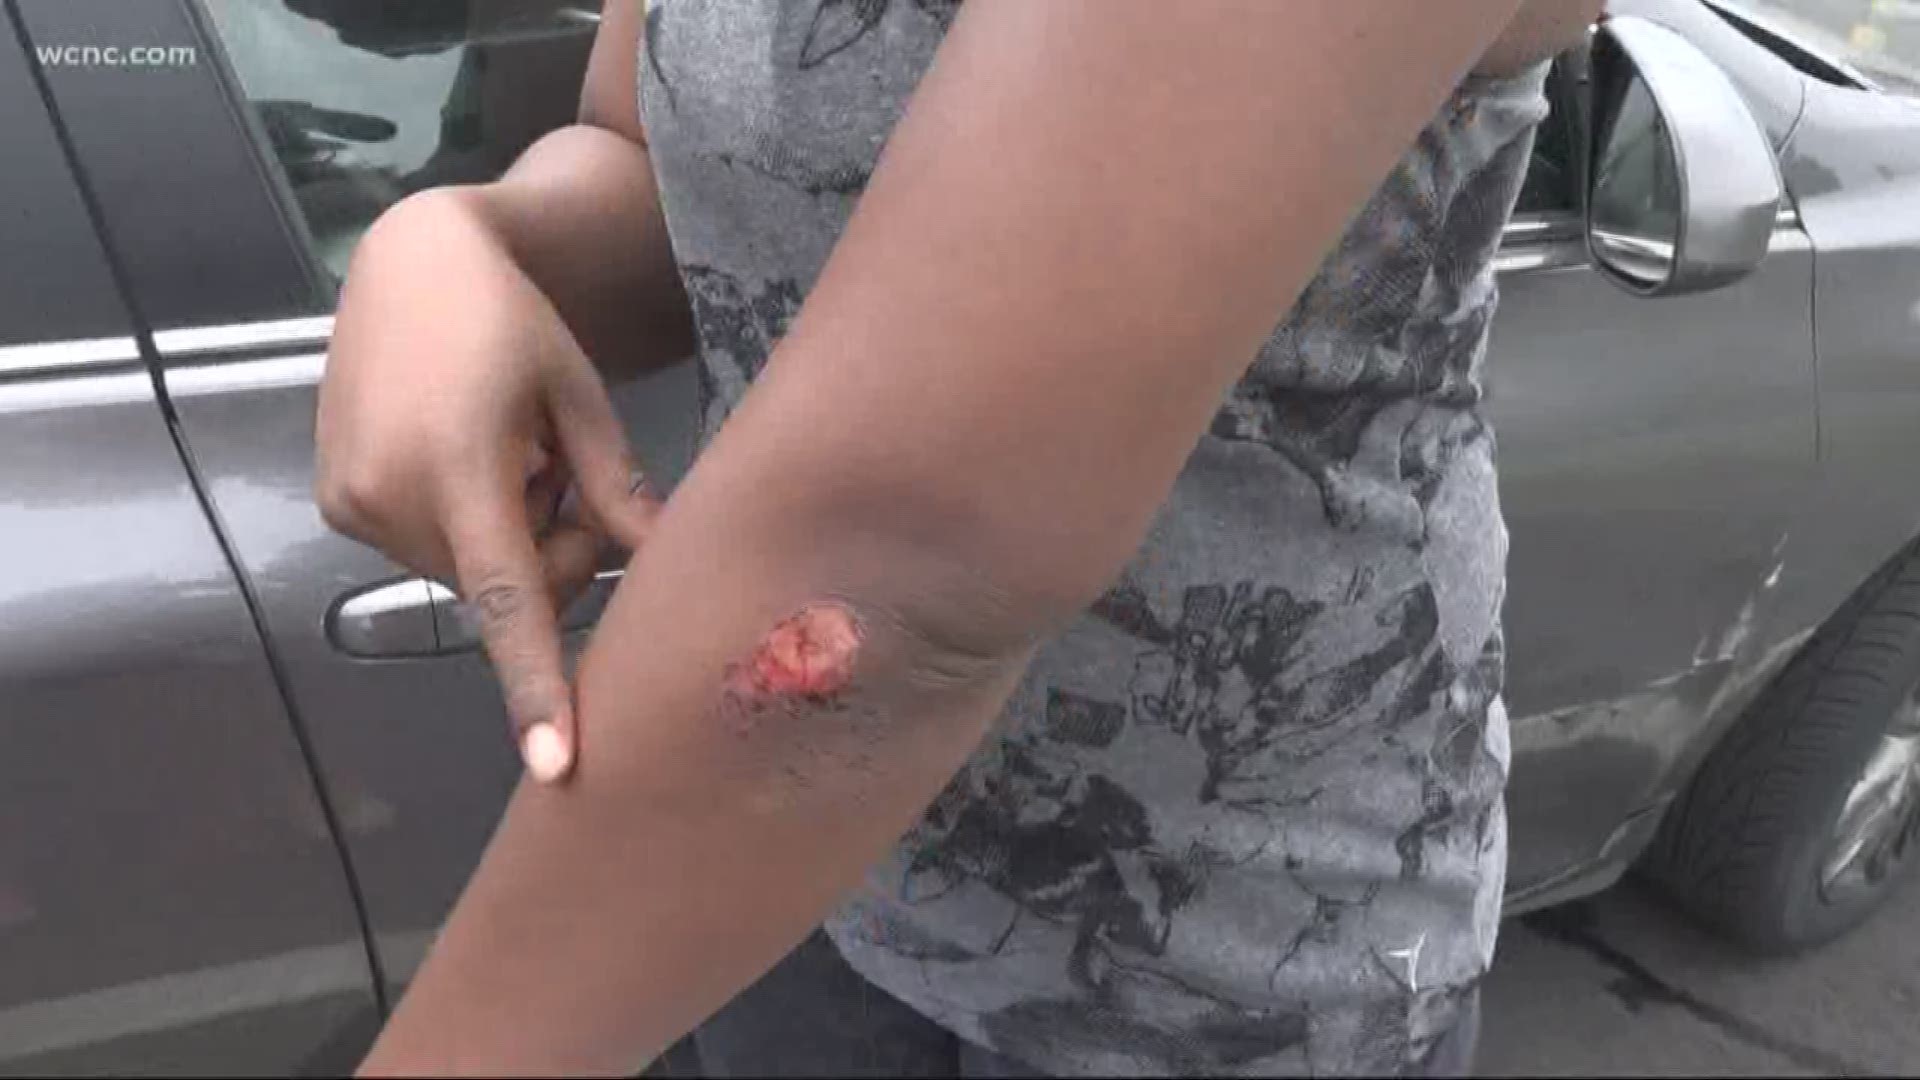 A Charlotte mom on edge after a terrifying road rage incident.